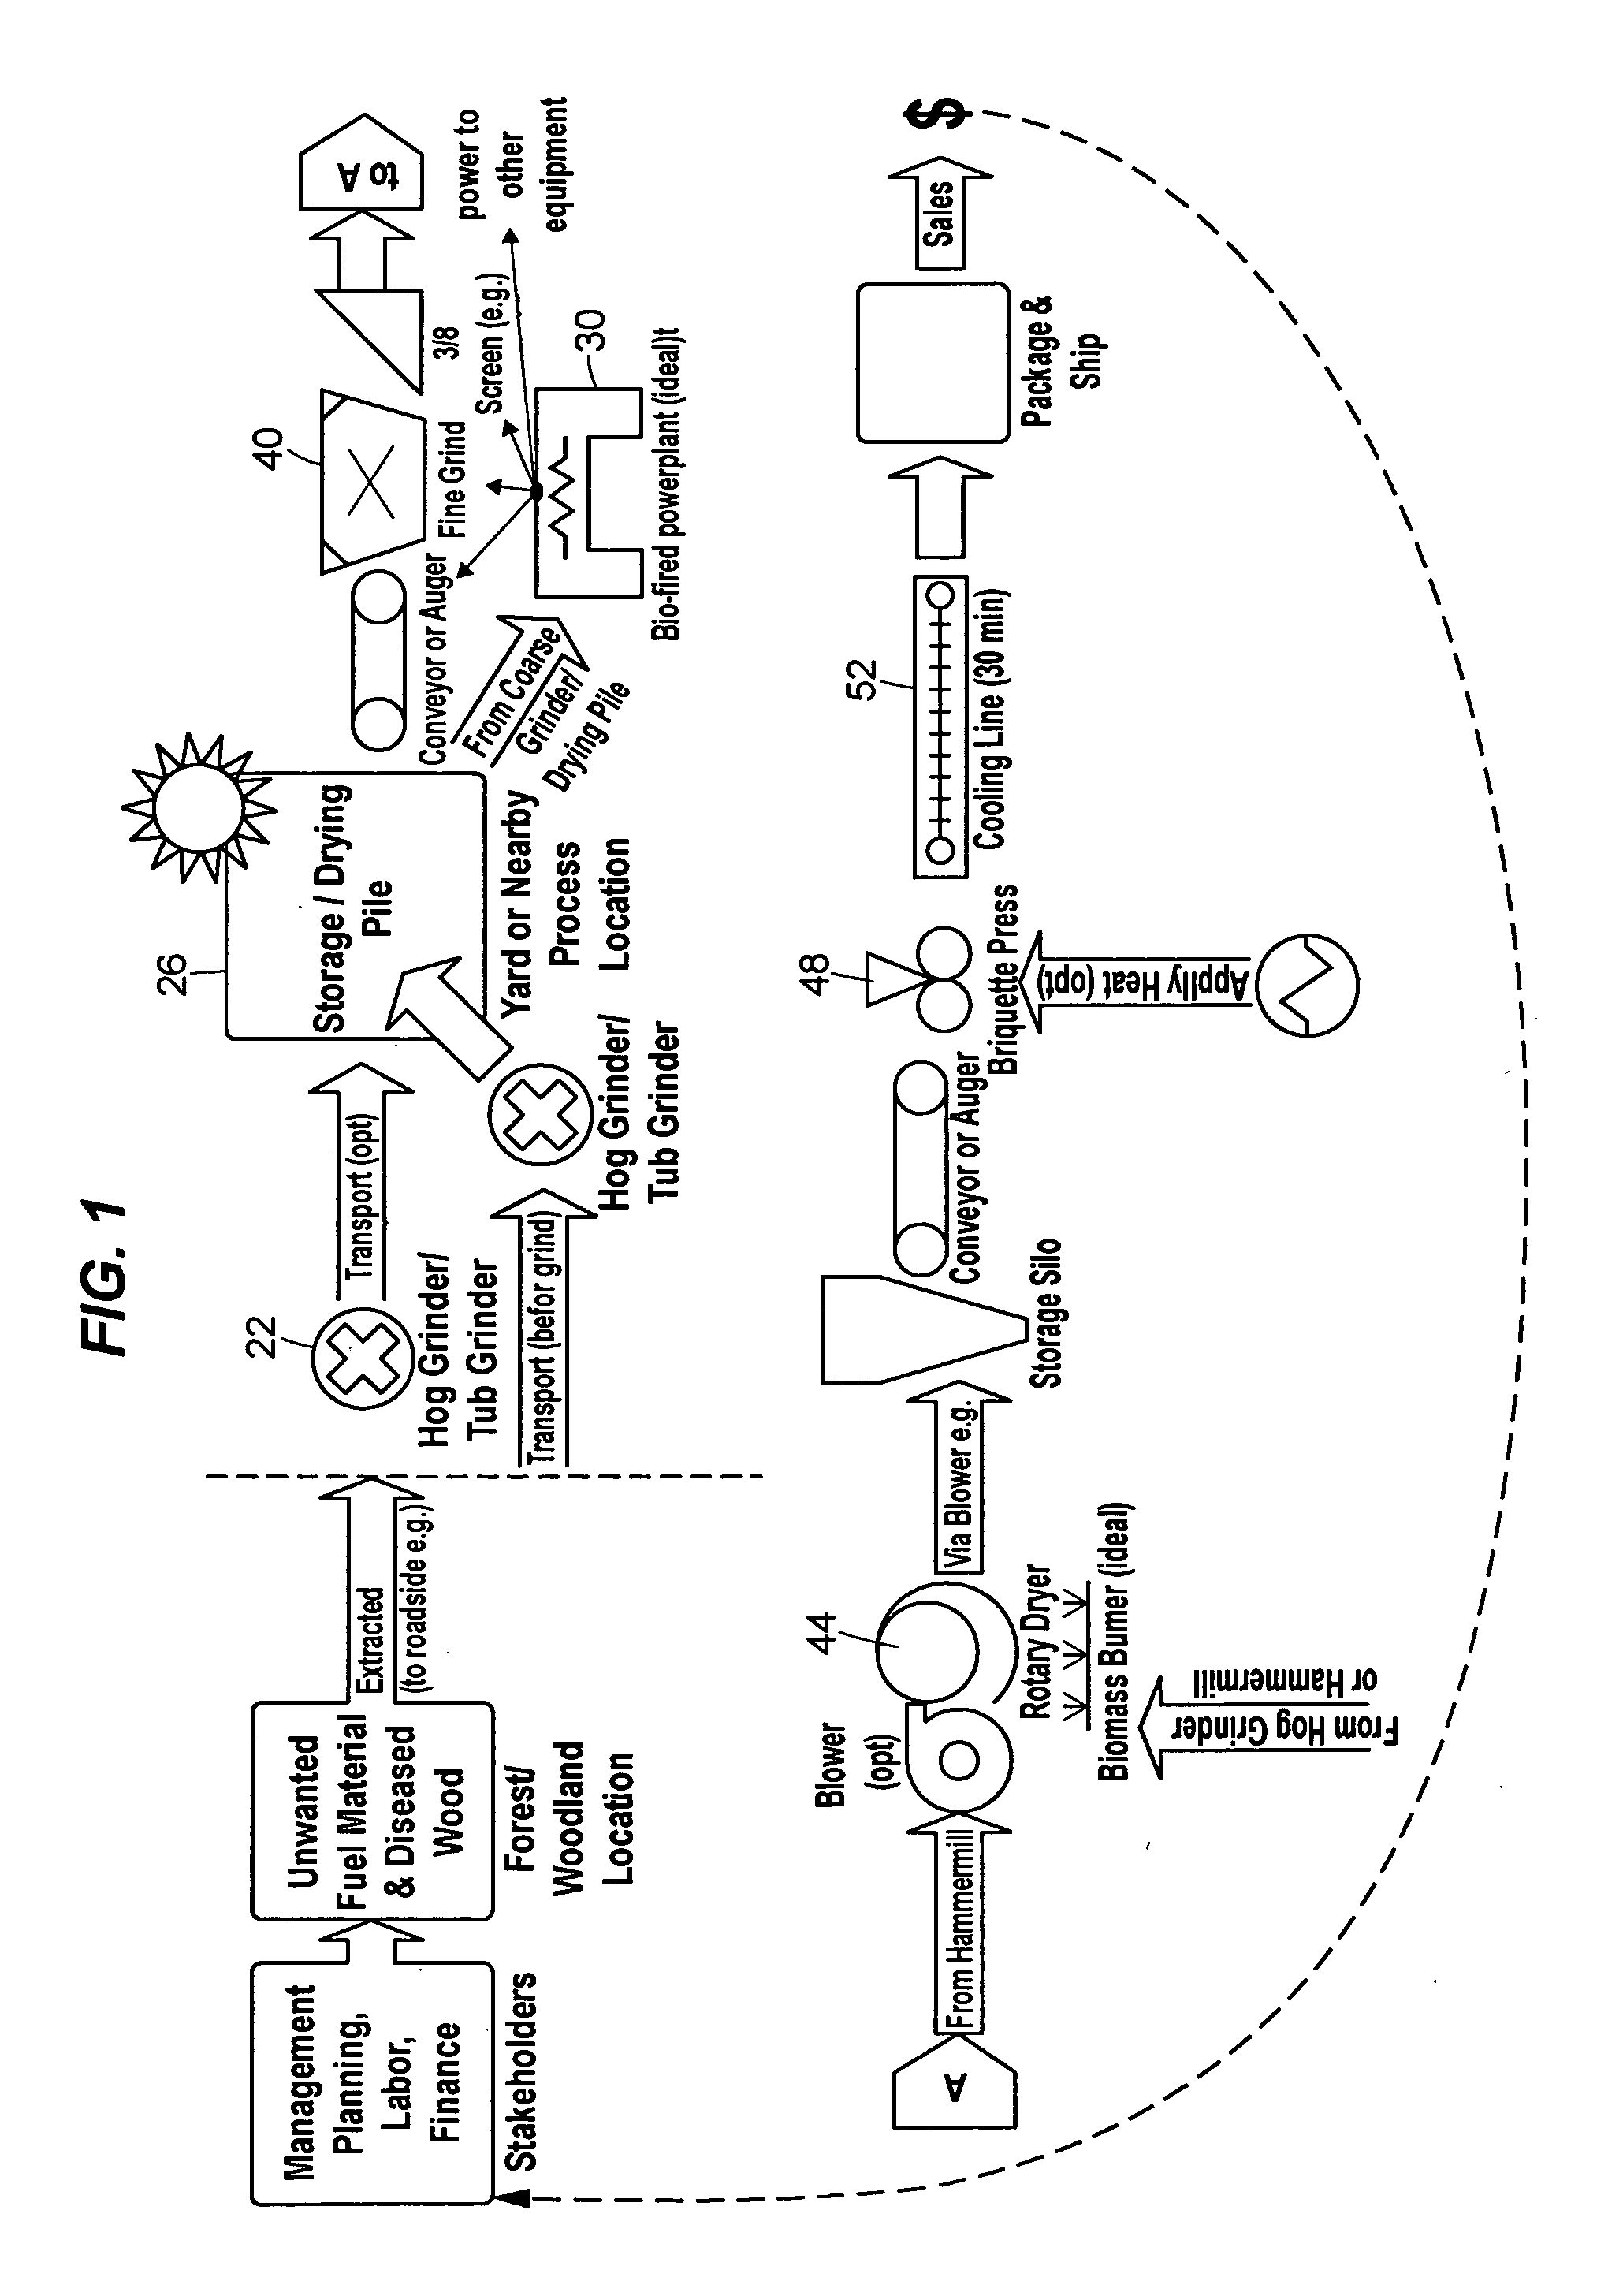 Method of manufacturing densified firelog from unwanted and diseased wood, and method of doing business regarding same